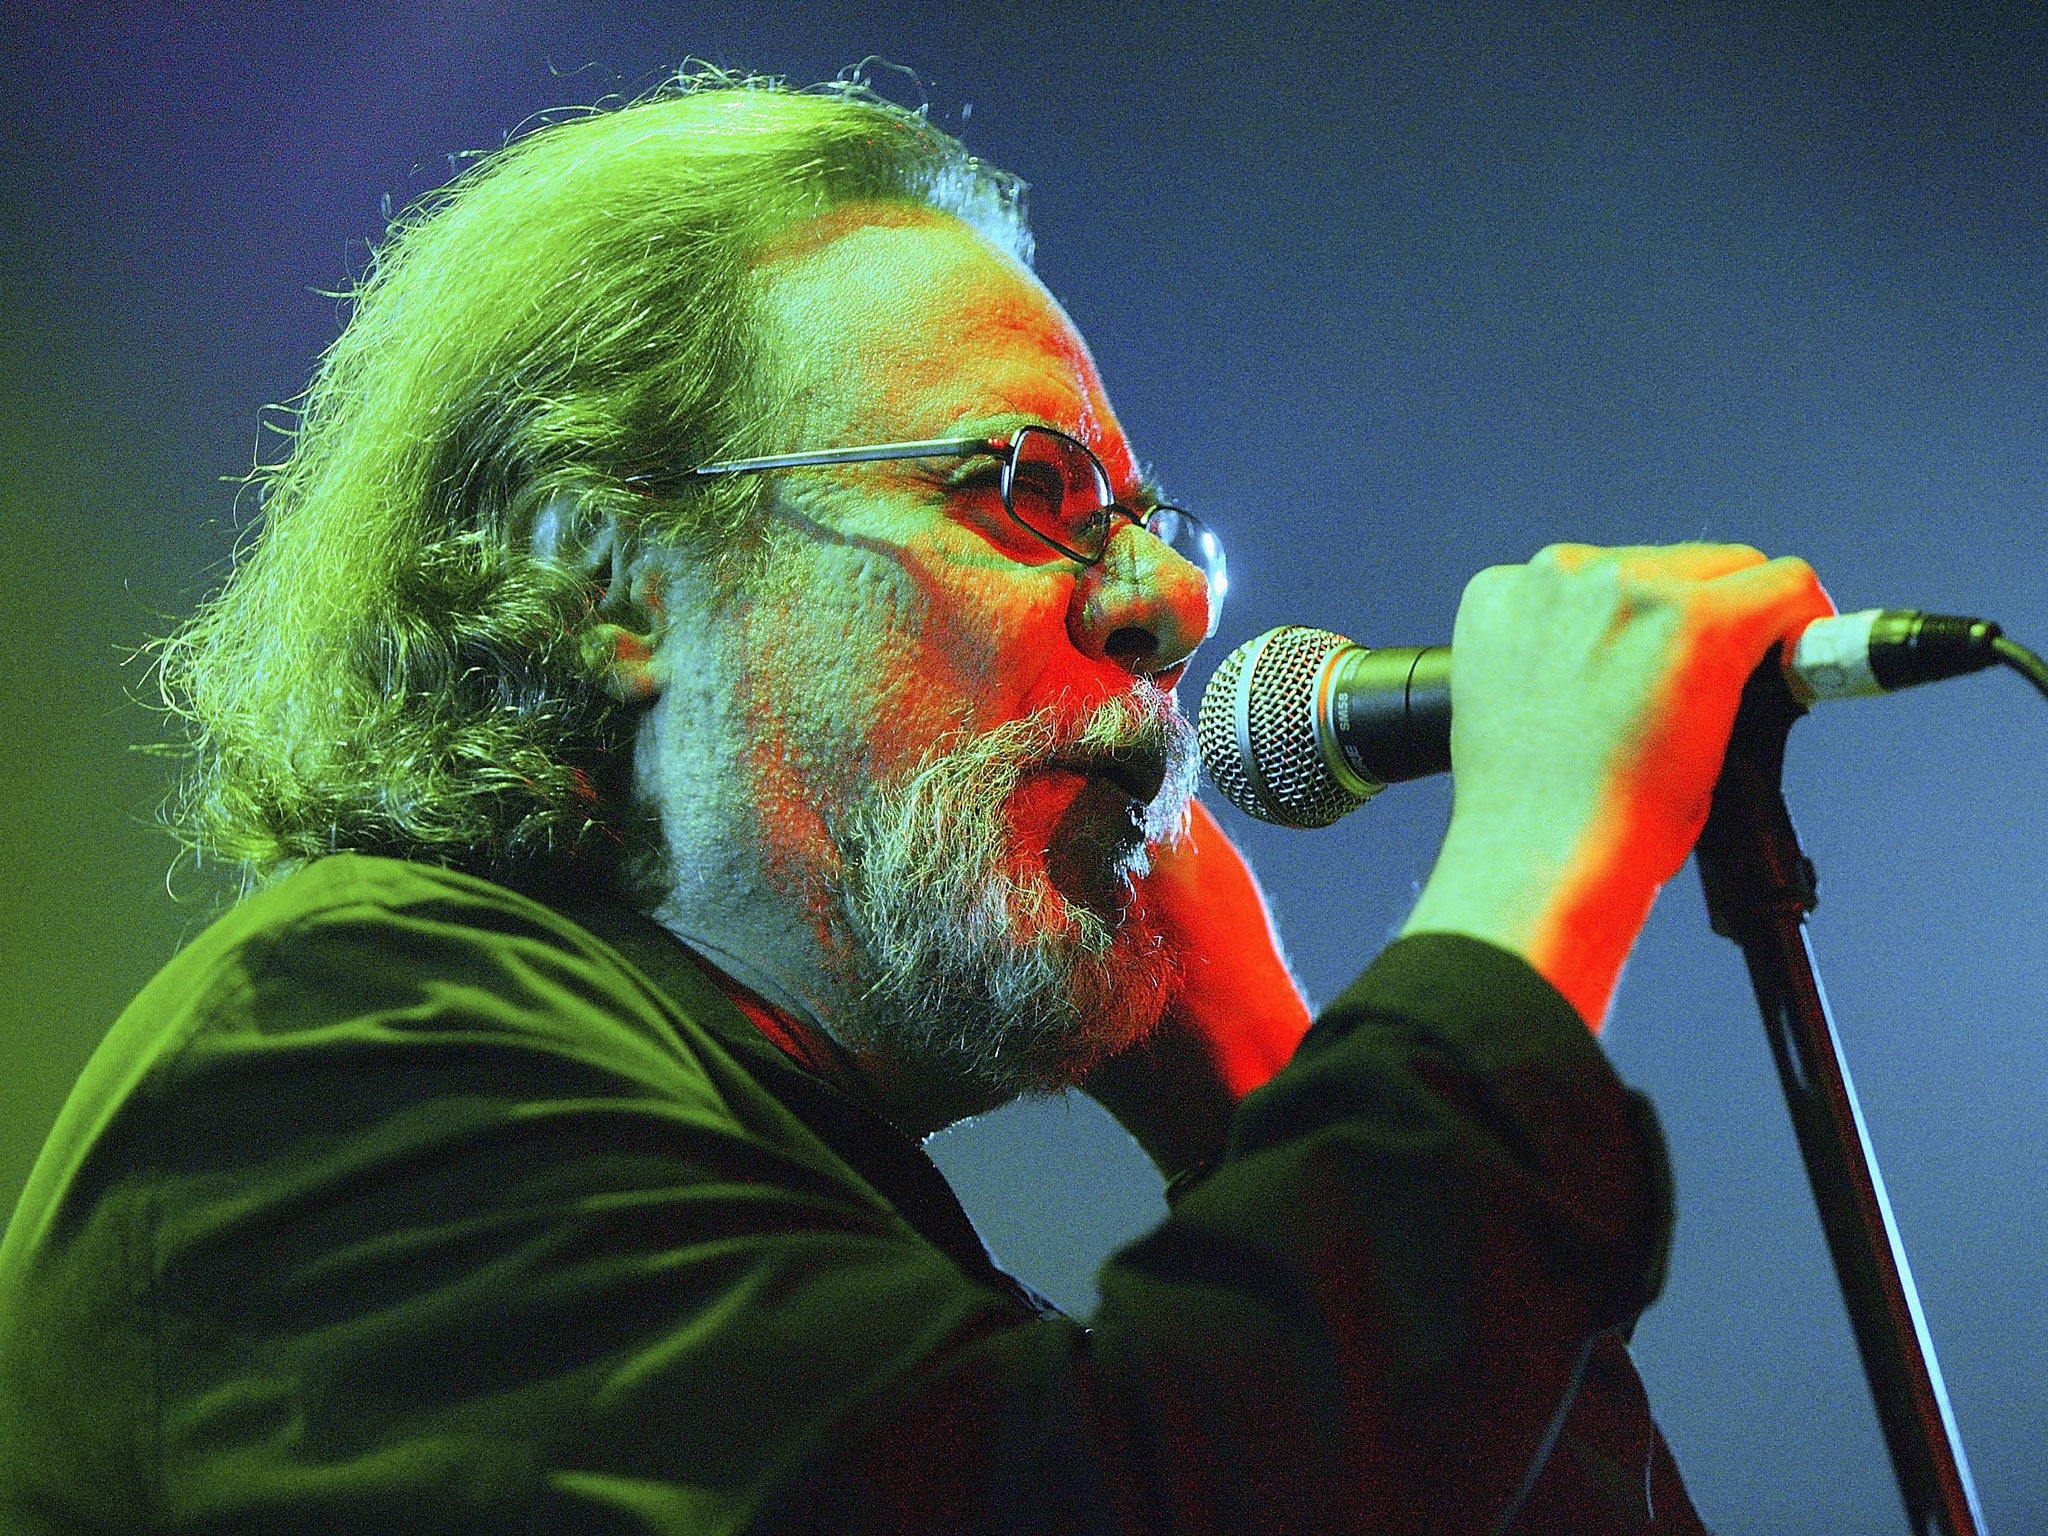 Tommy Ramone performs on stage during The Ramones Cancer Benefit at Spirit October 8, 2004 in New York City.